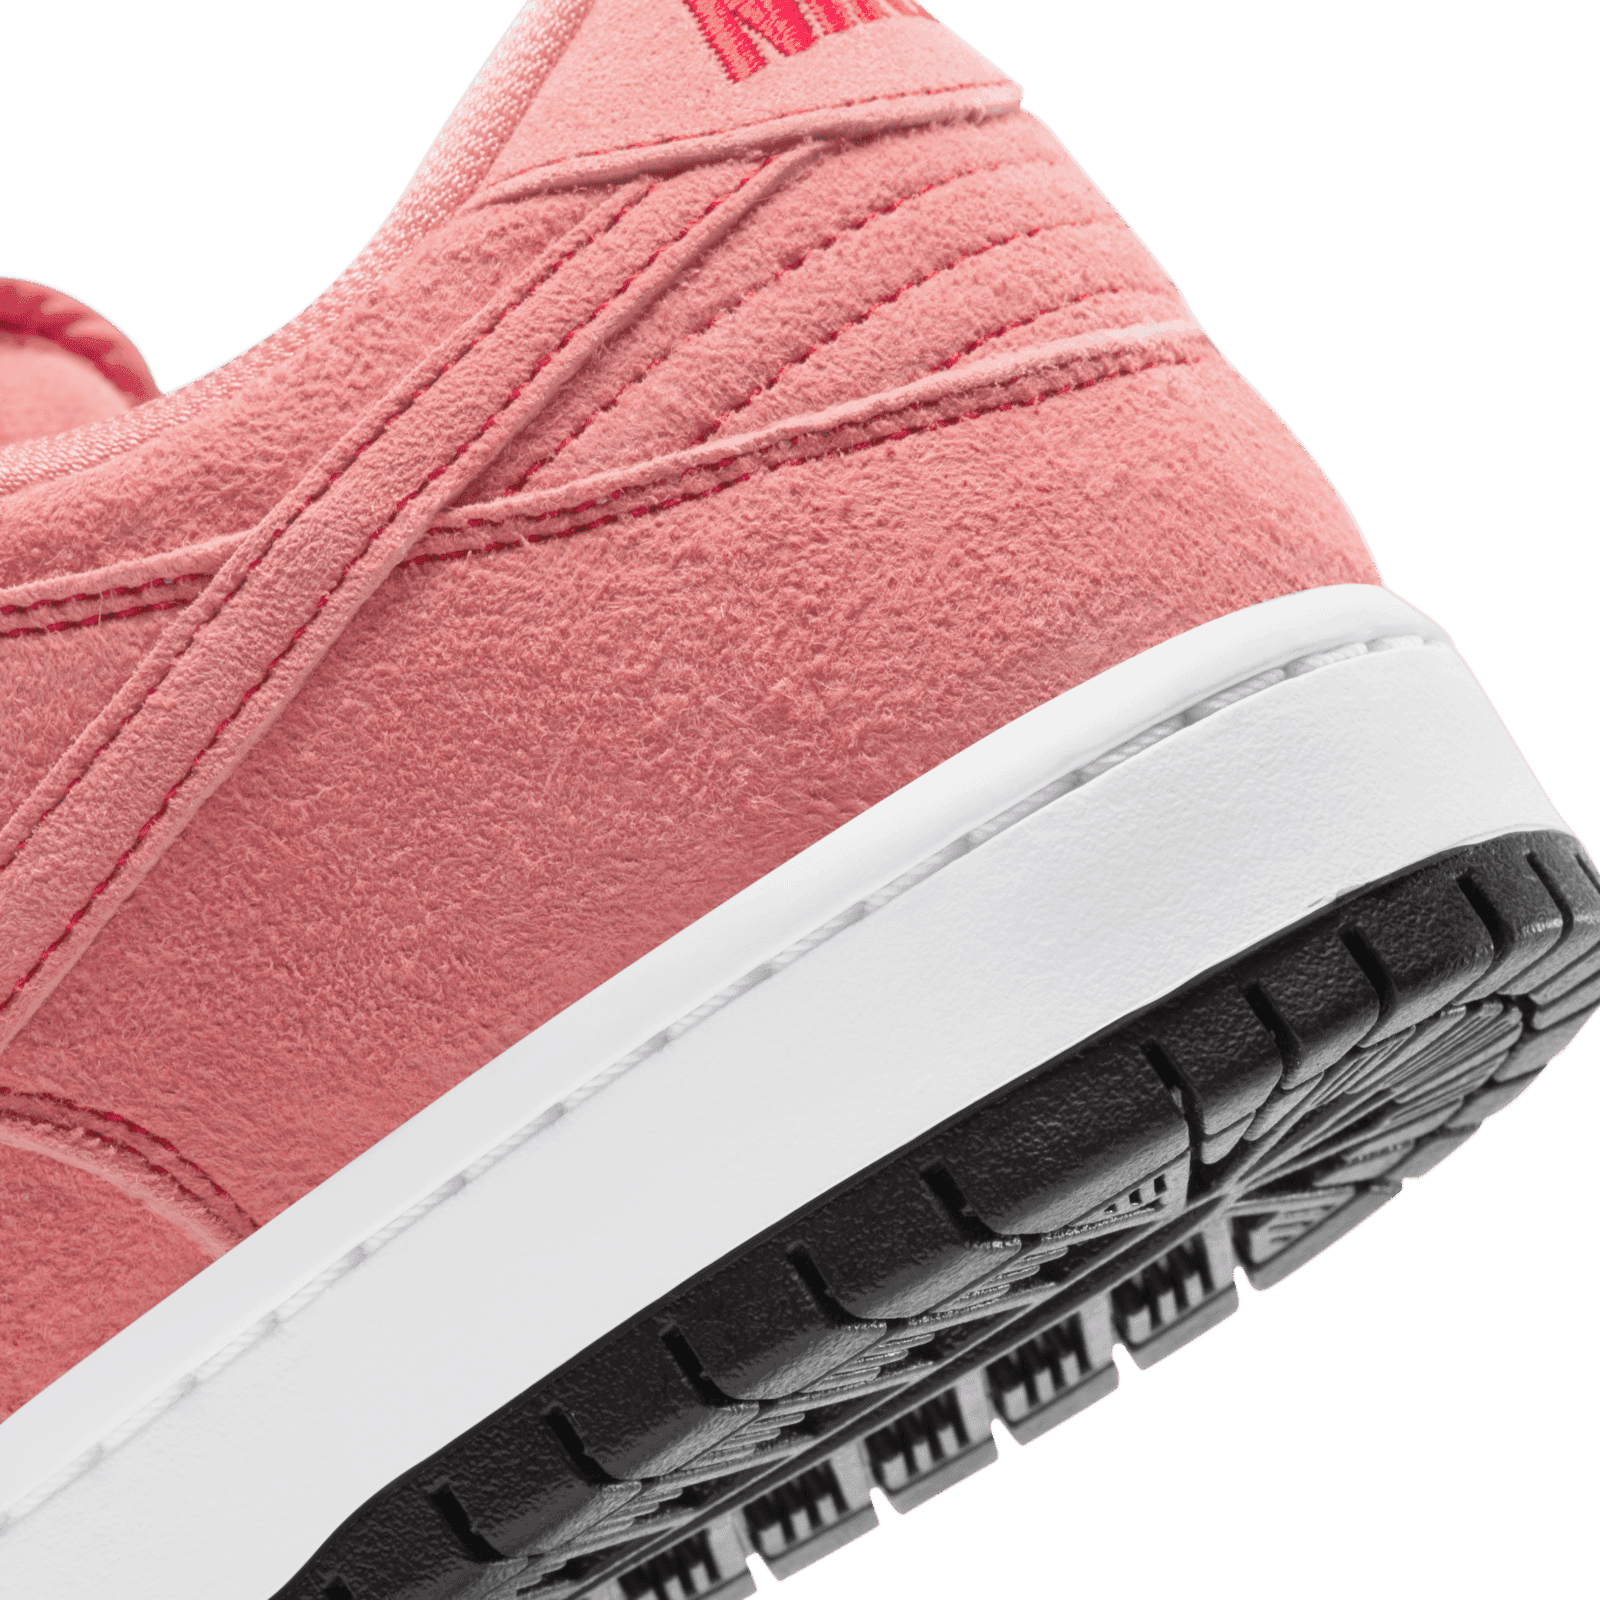 Nike SB Dunk Low Pink Pig - CV1655-600 Raffles and Release Date